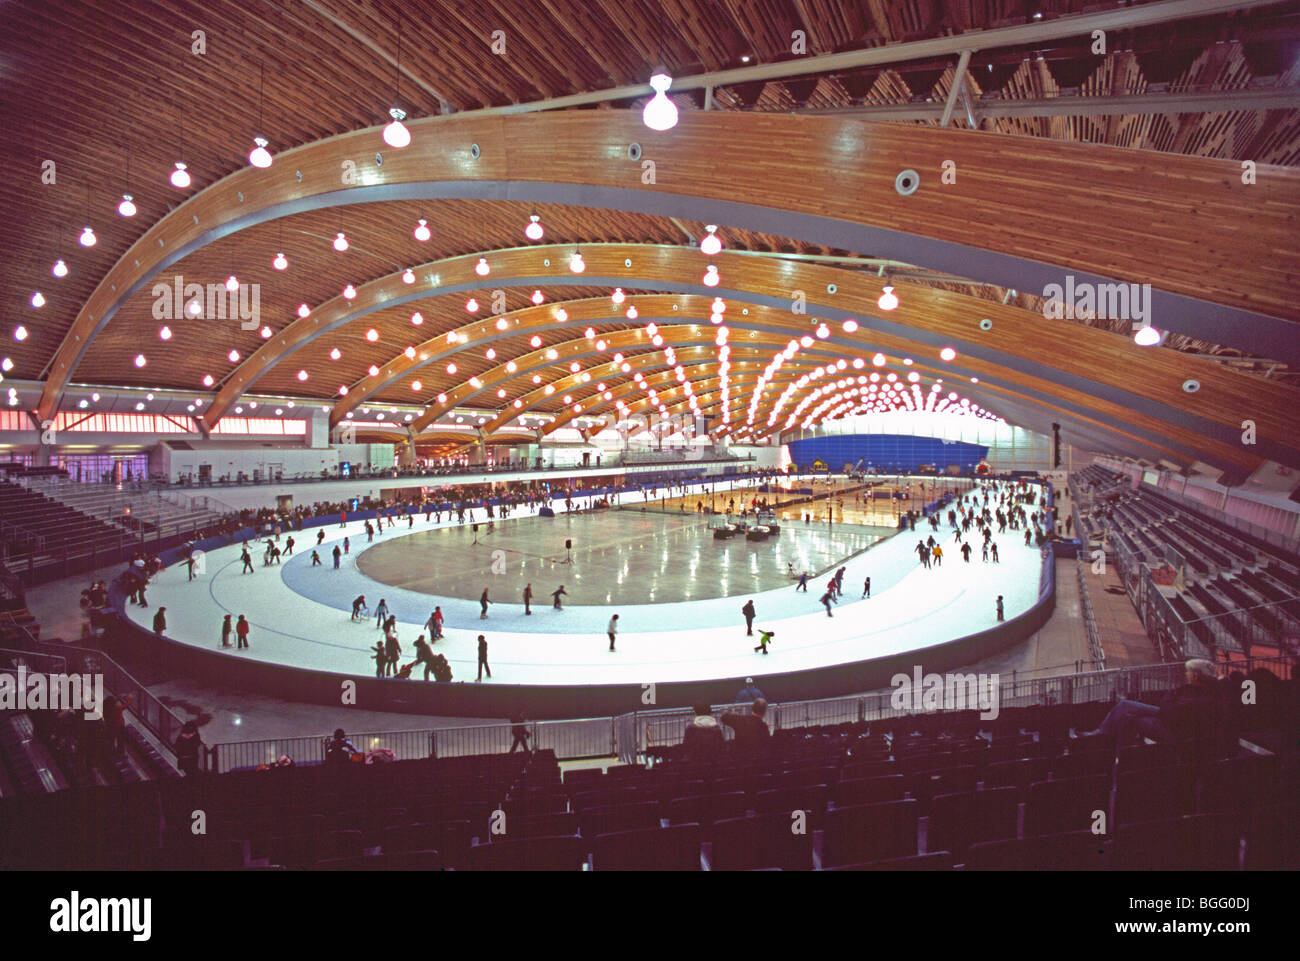 London's £30m ice skating centre with two Olympic-sized rinks to